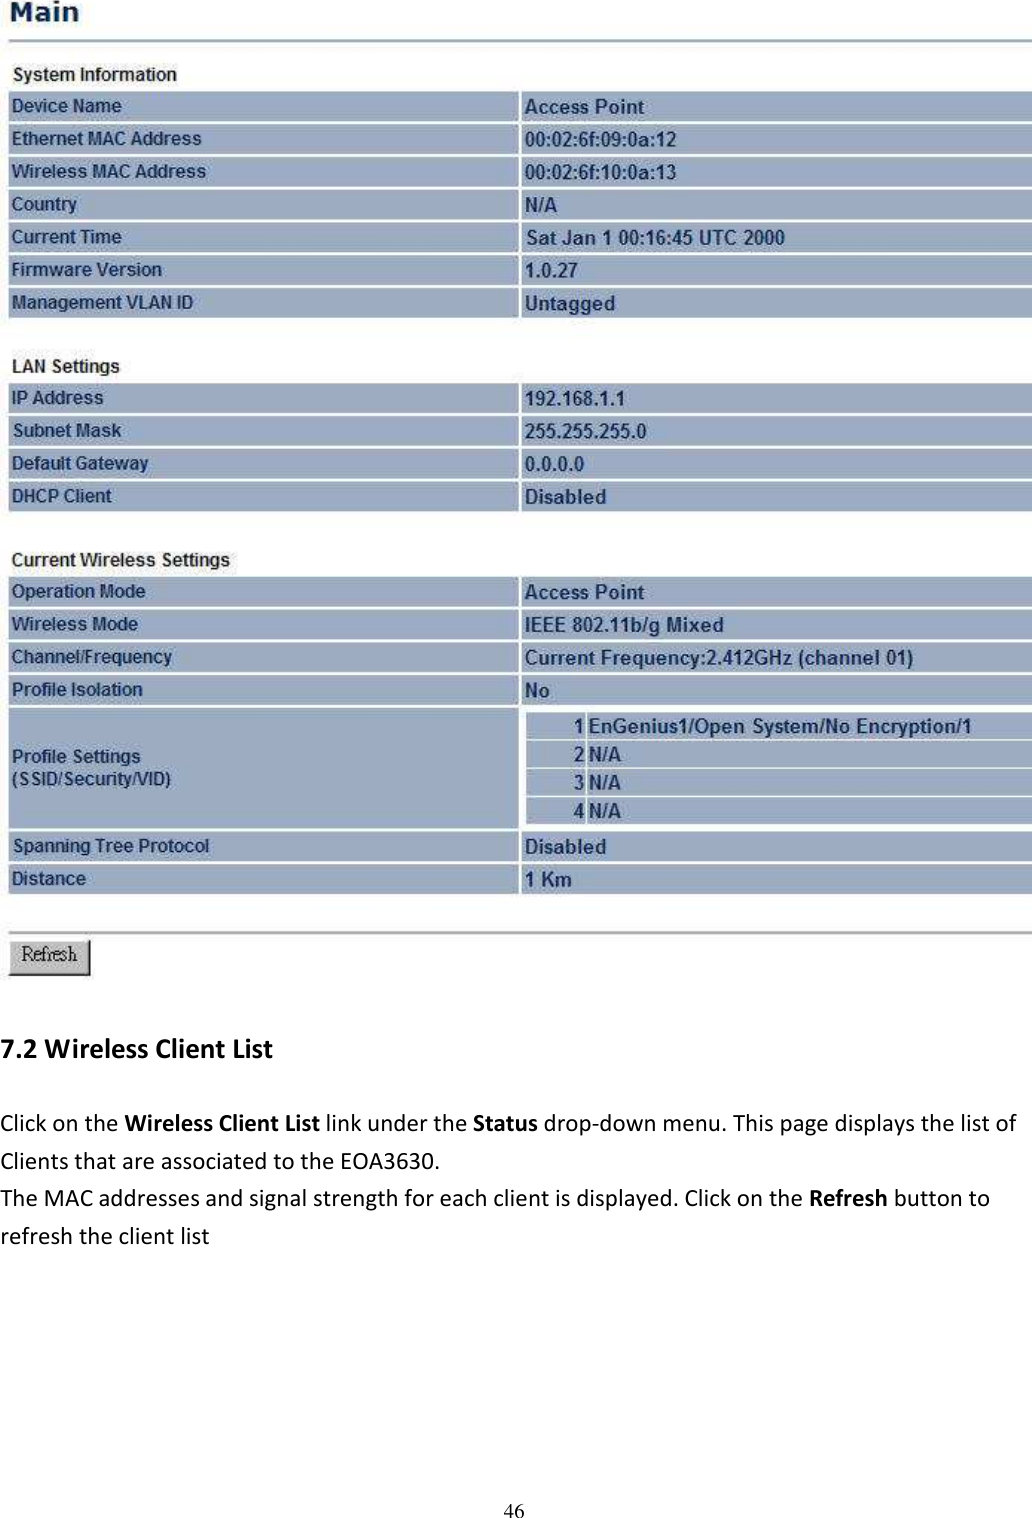   46 7.2 Wireless Client List Click on the Wireless Client List link under the Status drop-down menu. This page displays the list of Clients that are associated to the EOA3630.   The MAC addresses and signal strength for each client is displayed. Click on the Refresh button to refresh the client list   